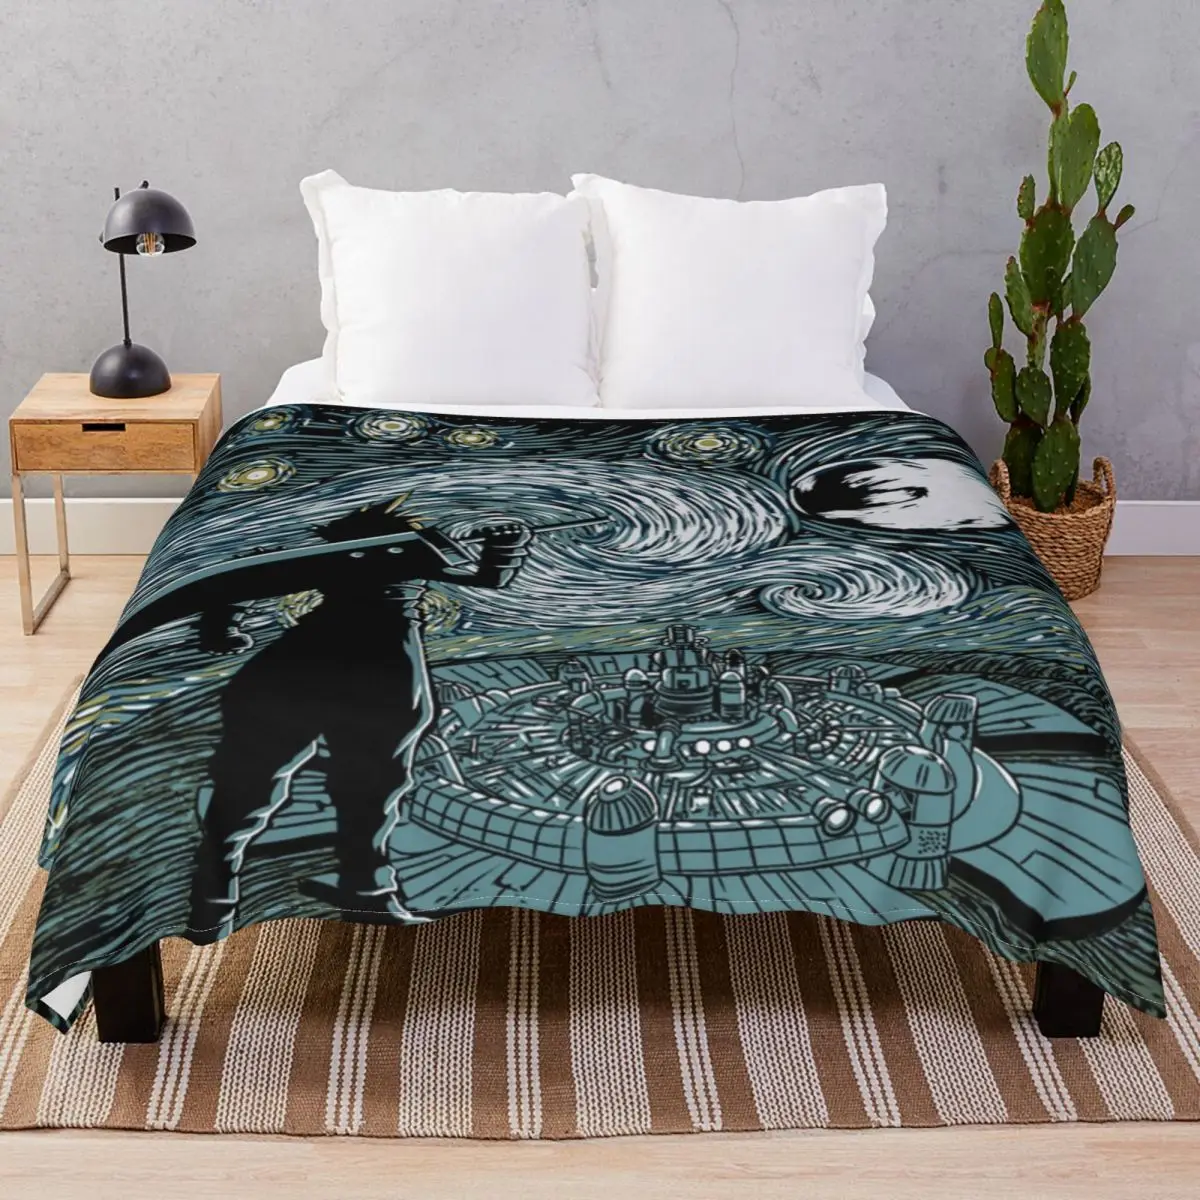 Final Fantasy VII Blankets Flannel Autumn Ultra-Soft Throw Blanket for Bed Home Couch Travel Office